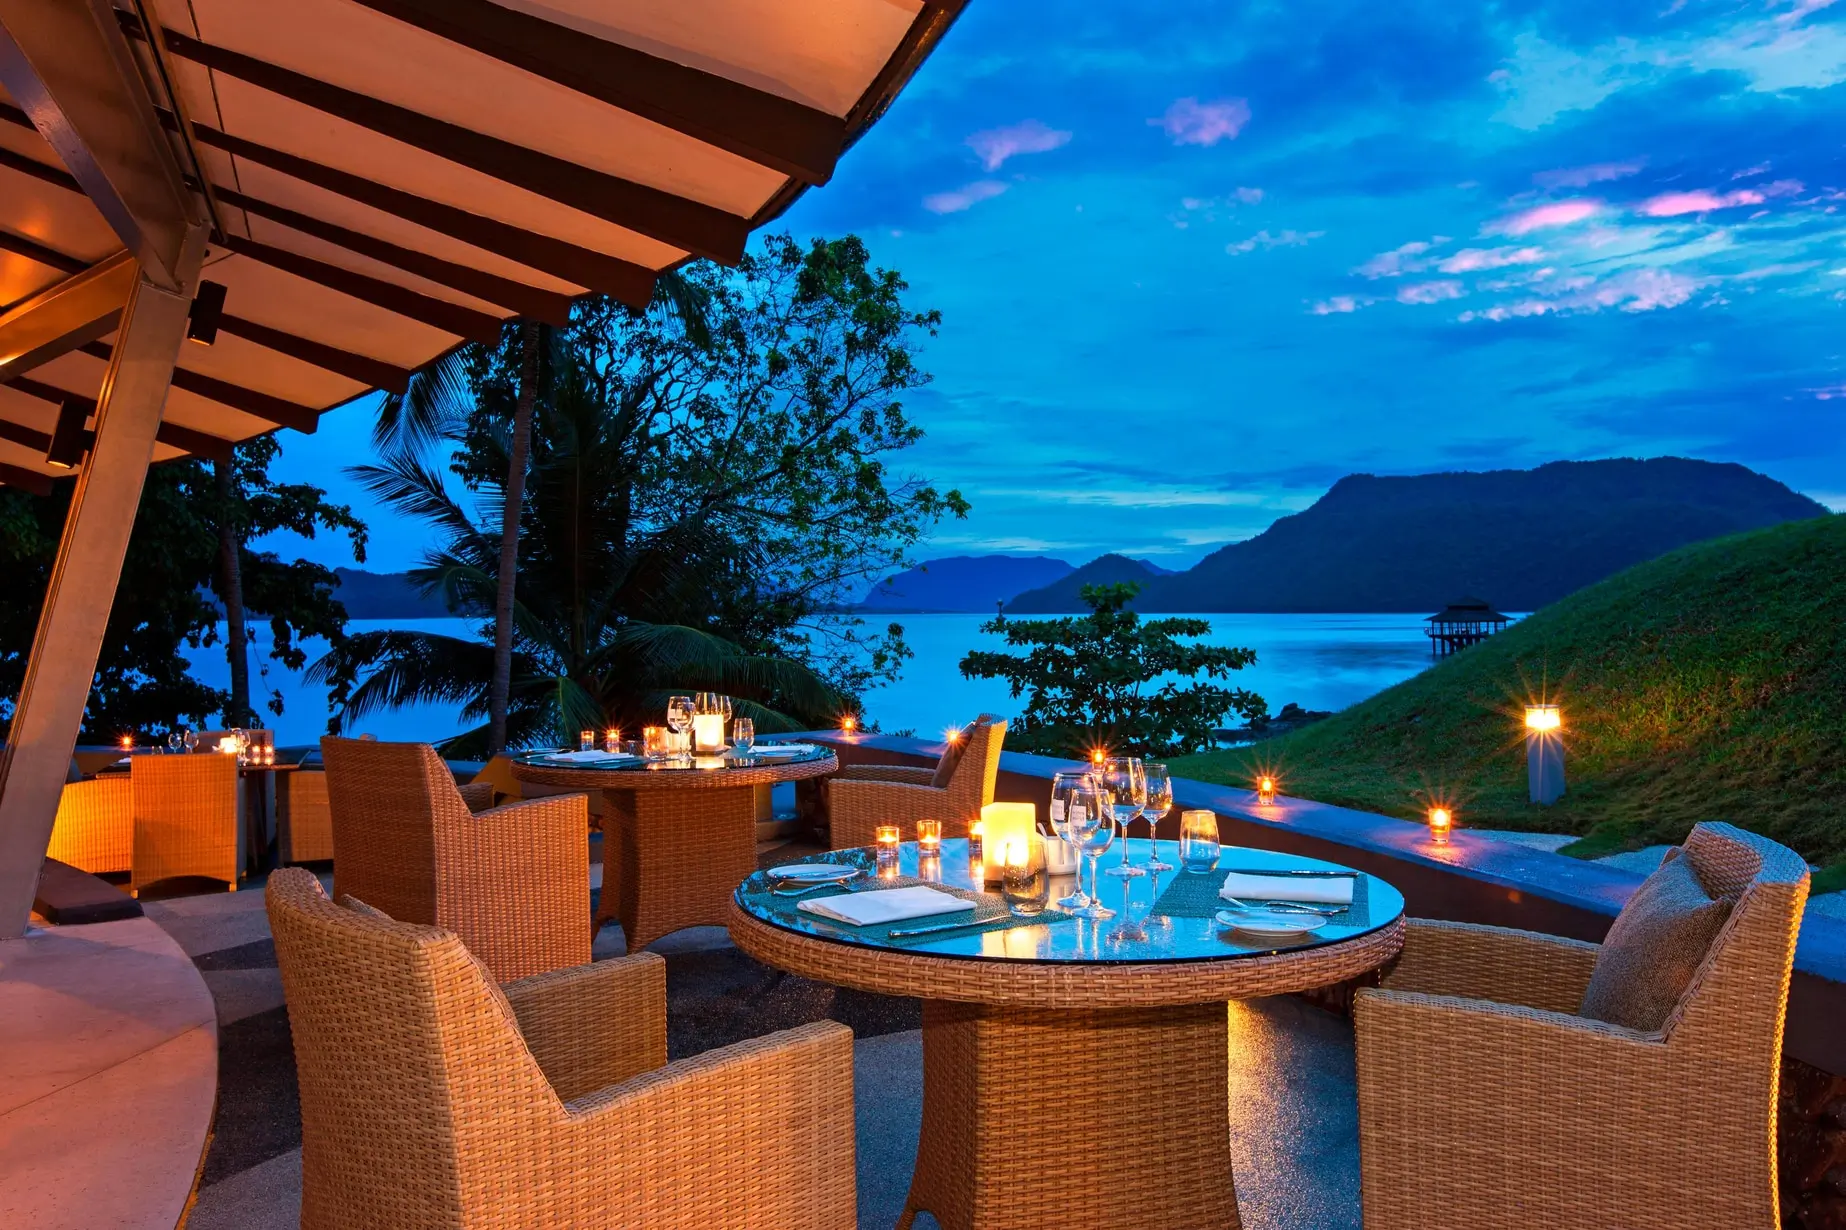 The evening View From The villas of Westin Resort Langkawi